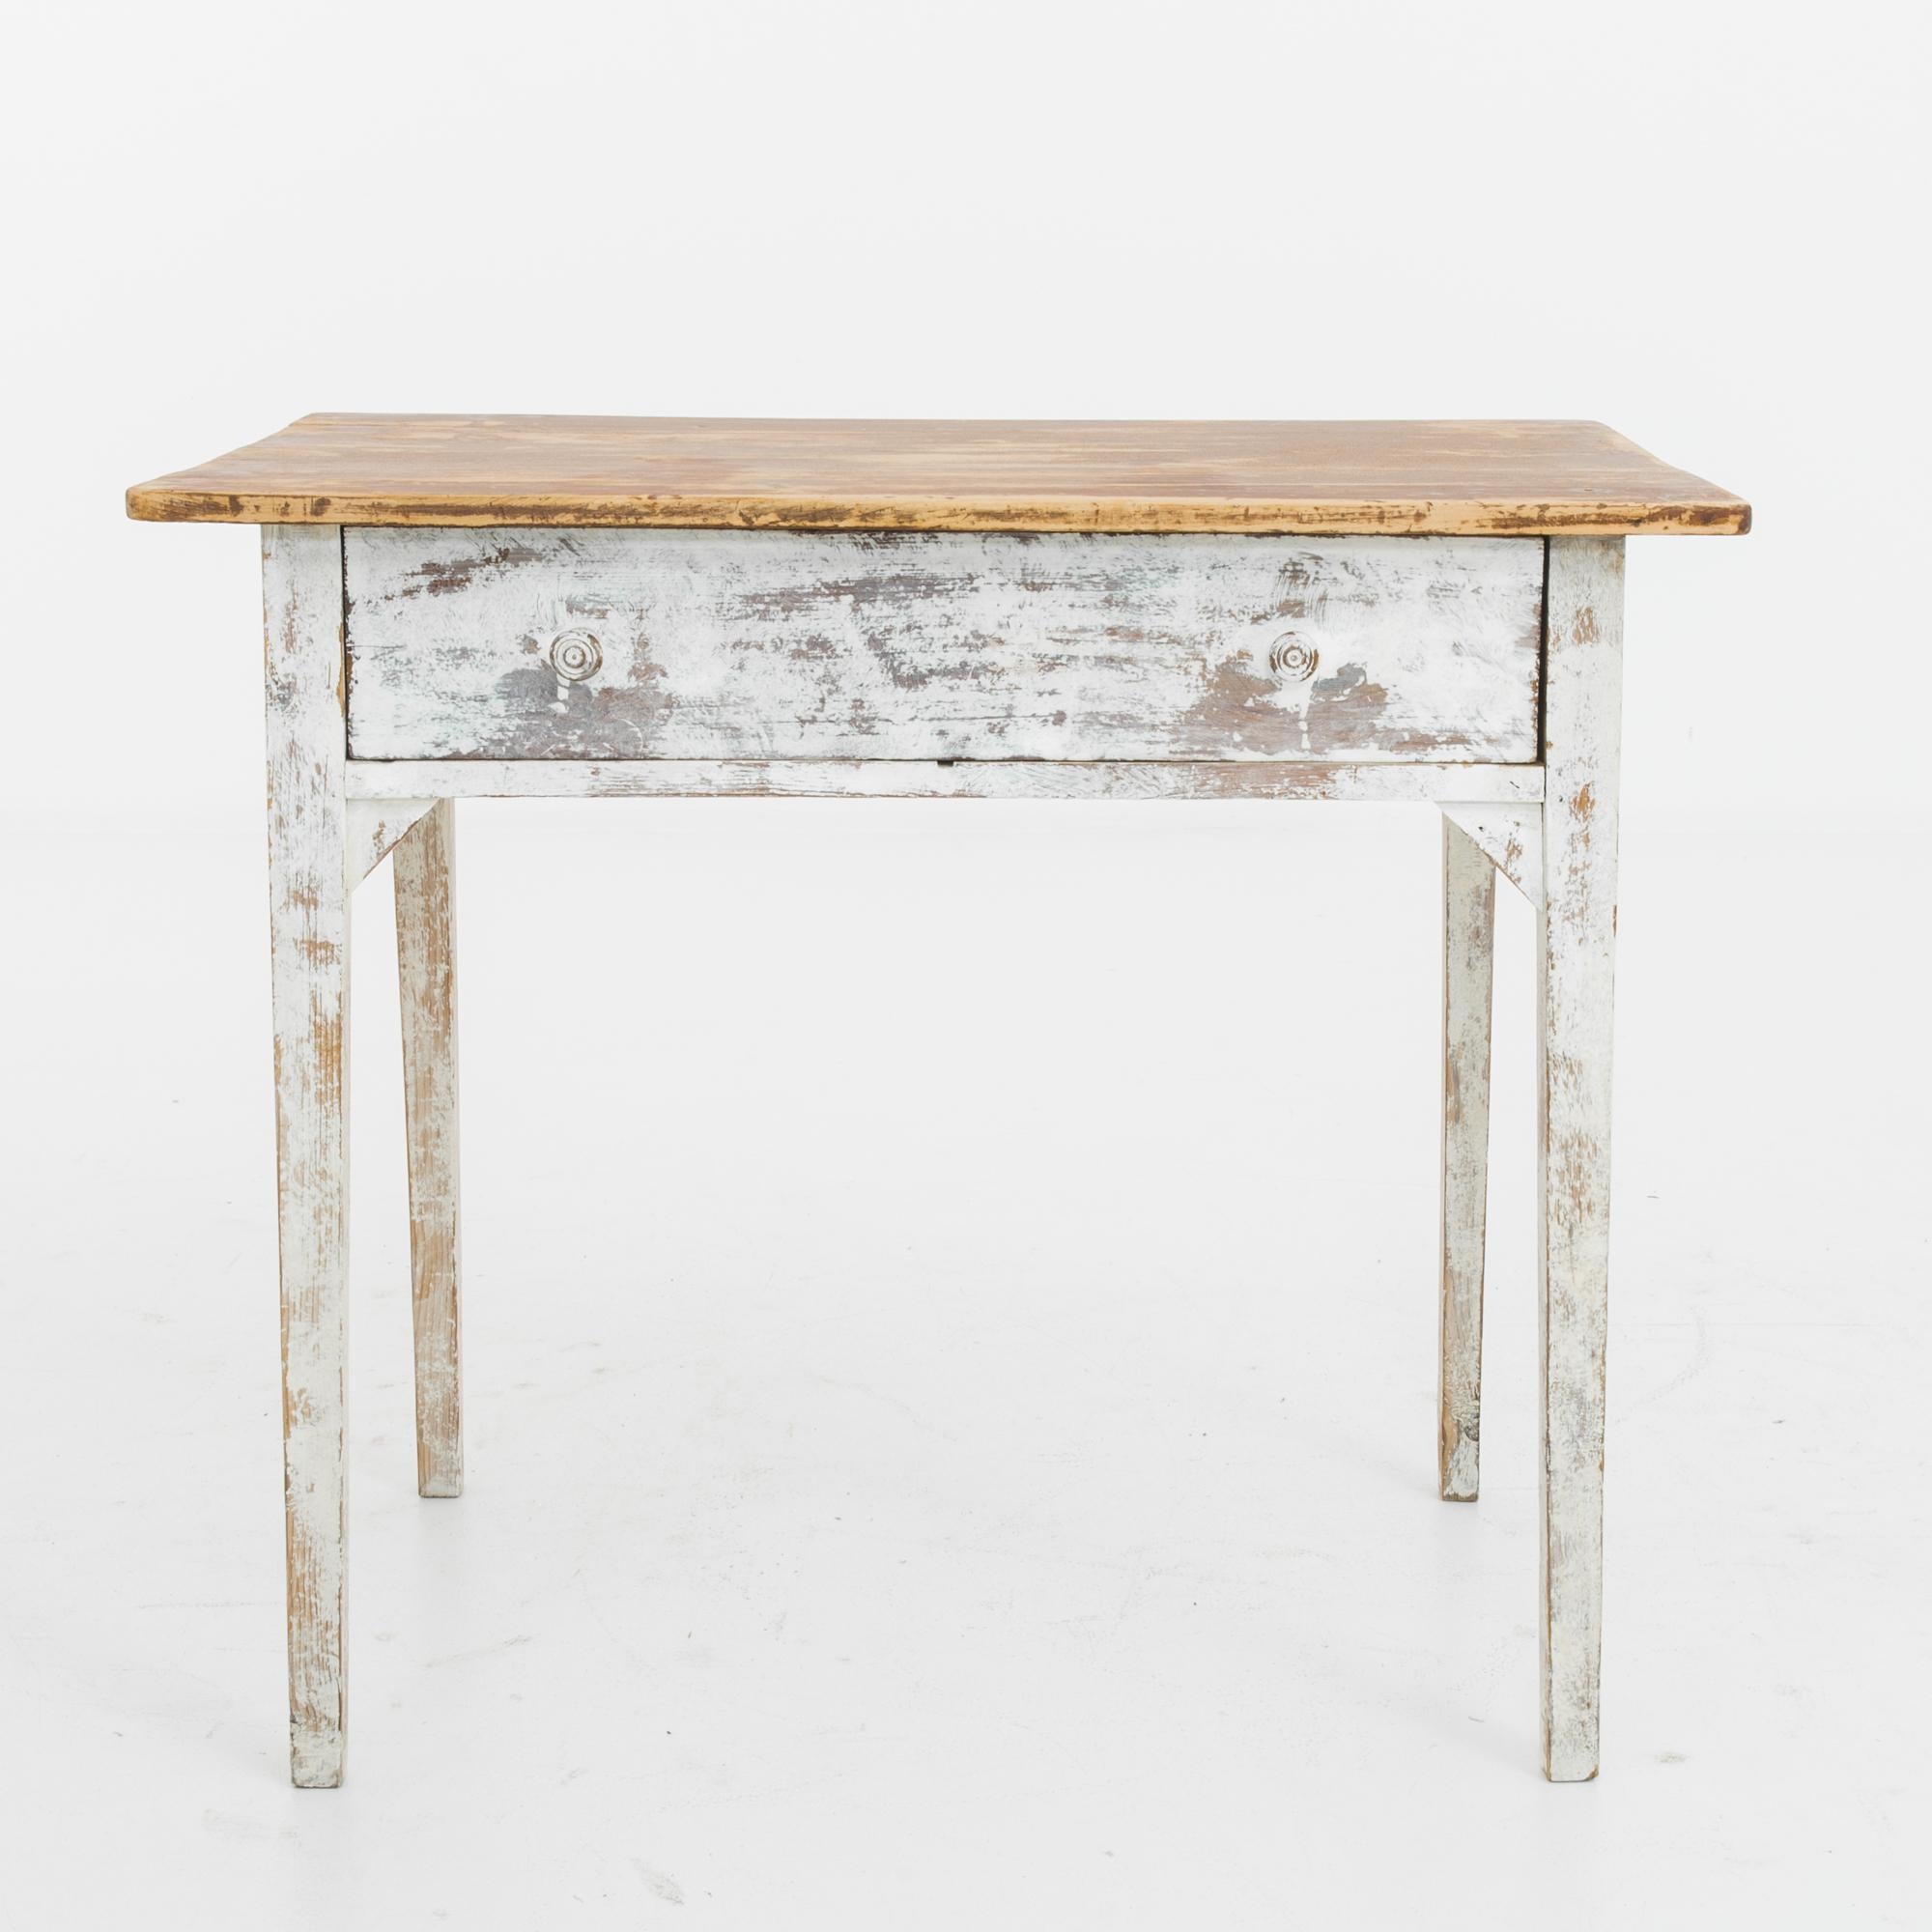 A wooden table from turn-of-the-century Belgium. The white paint of the legs has weathered to a cloudy patina, making a nostalgic contrast with the warm amber of the tabletop. A single deep drawer pulls out with carved round wooden knobs. The humble